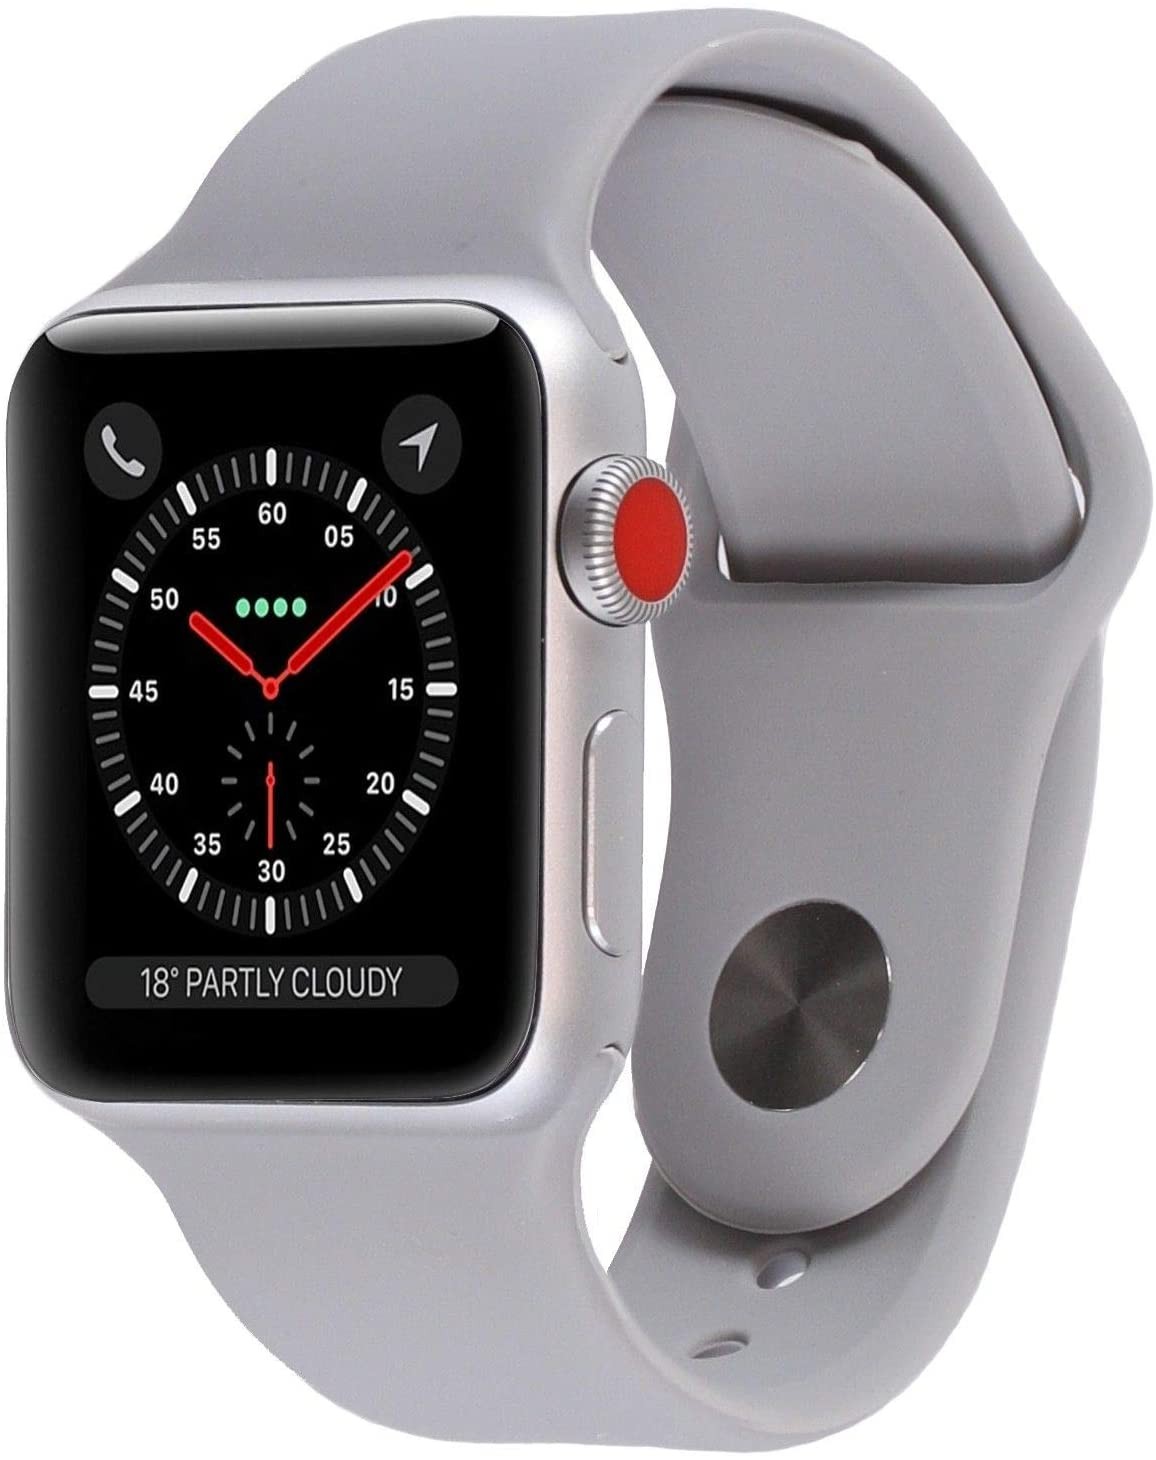 Apple Watch Series 3 (GPS + Cellular, 42MM) - Silver Aluminum Case with Fog Sport Band